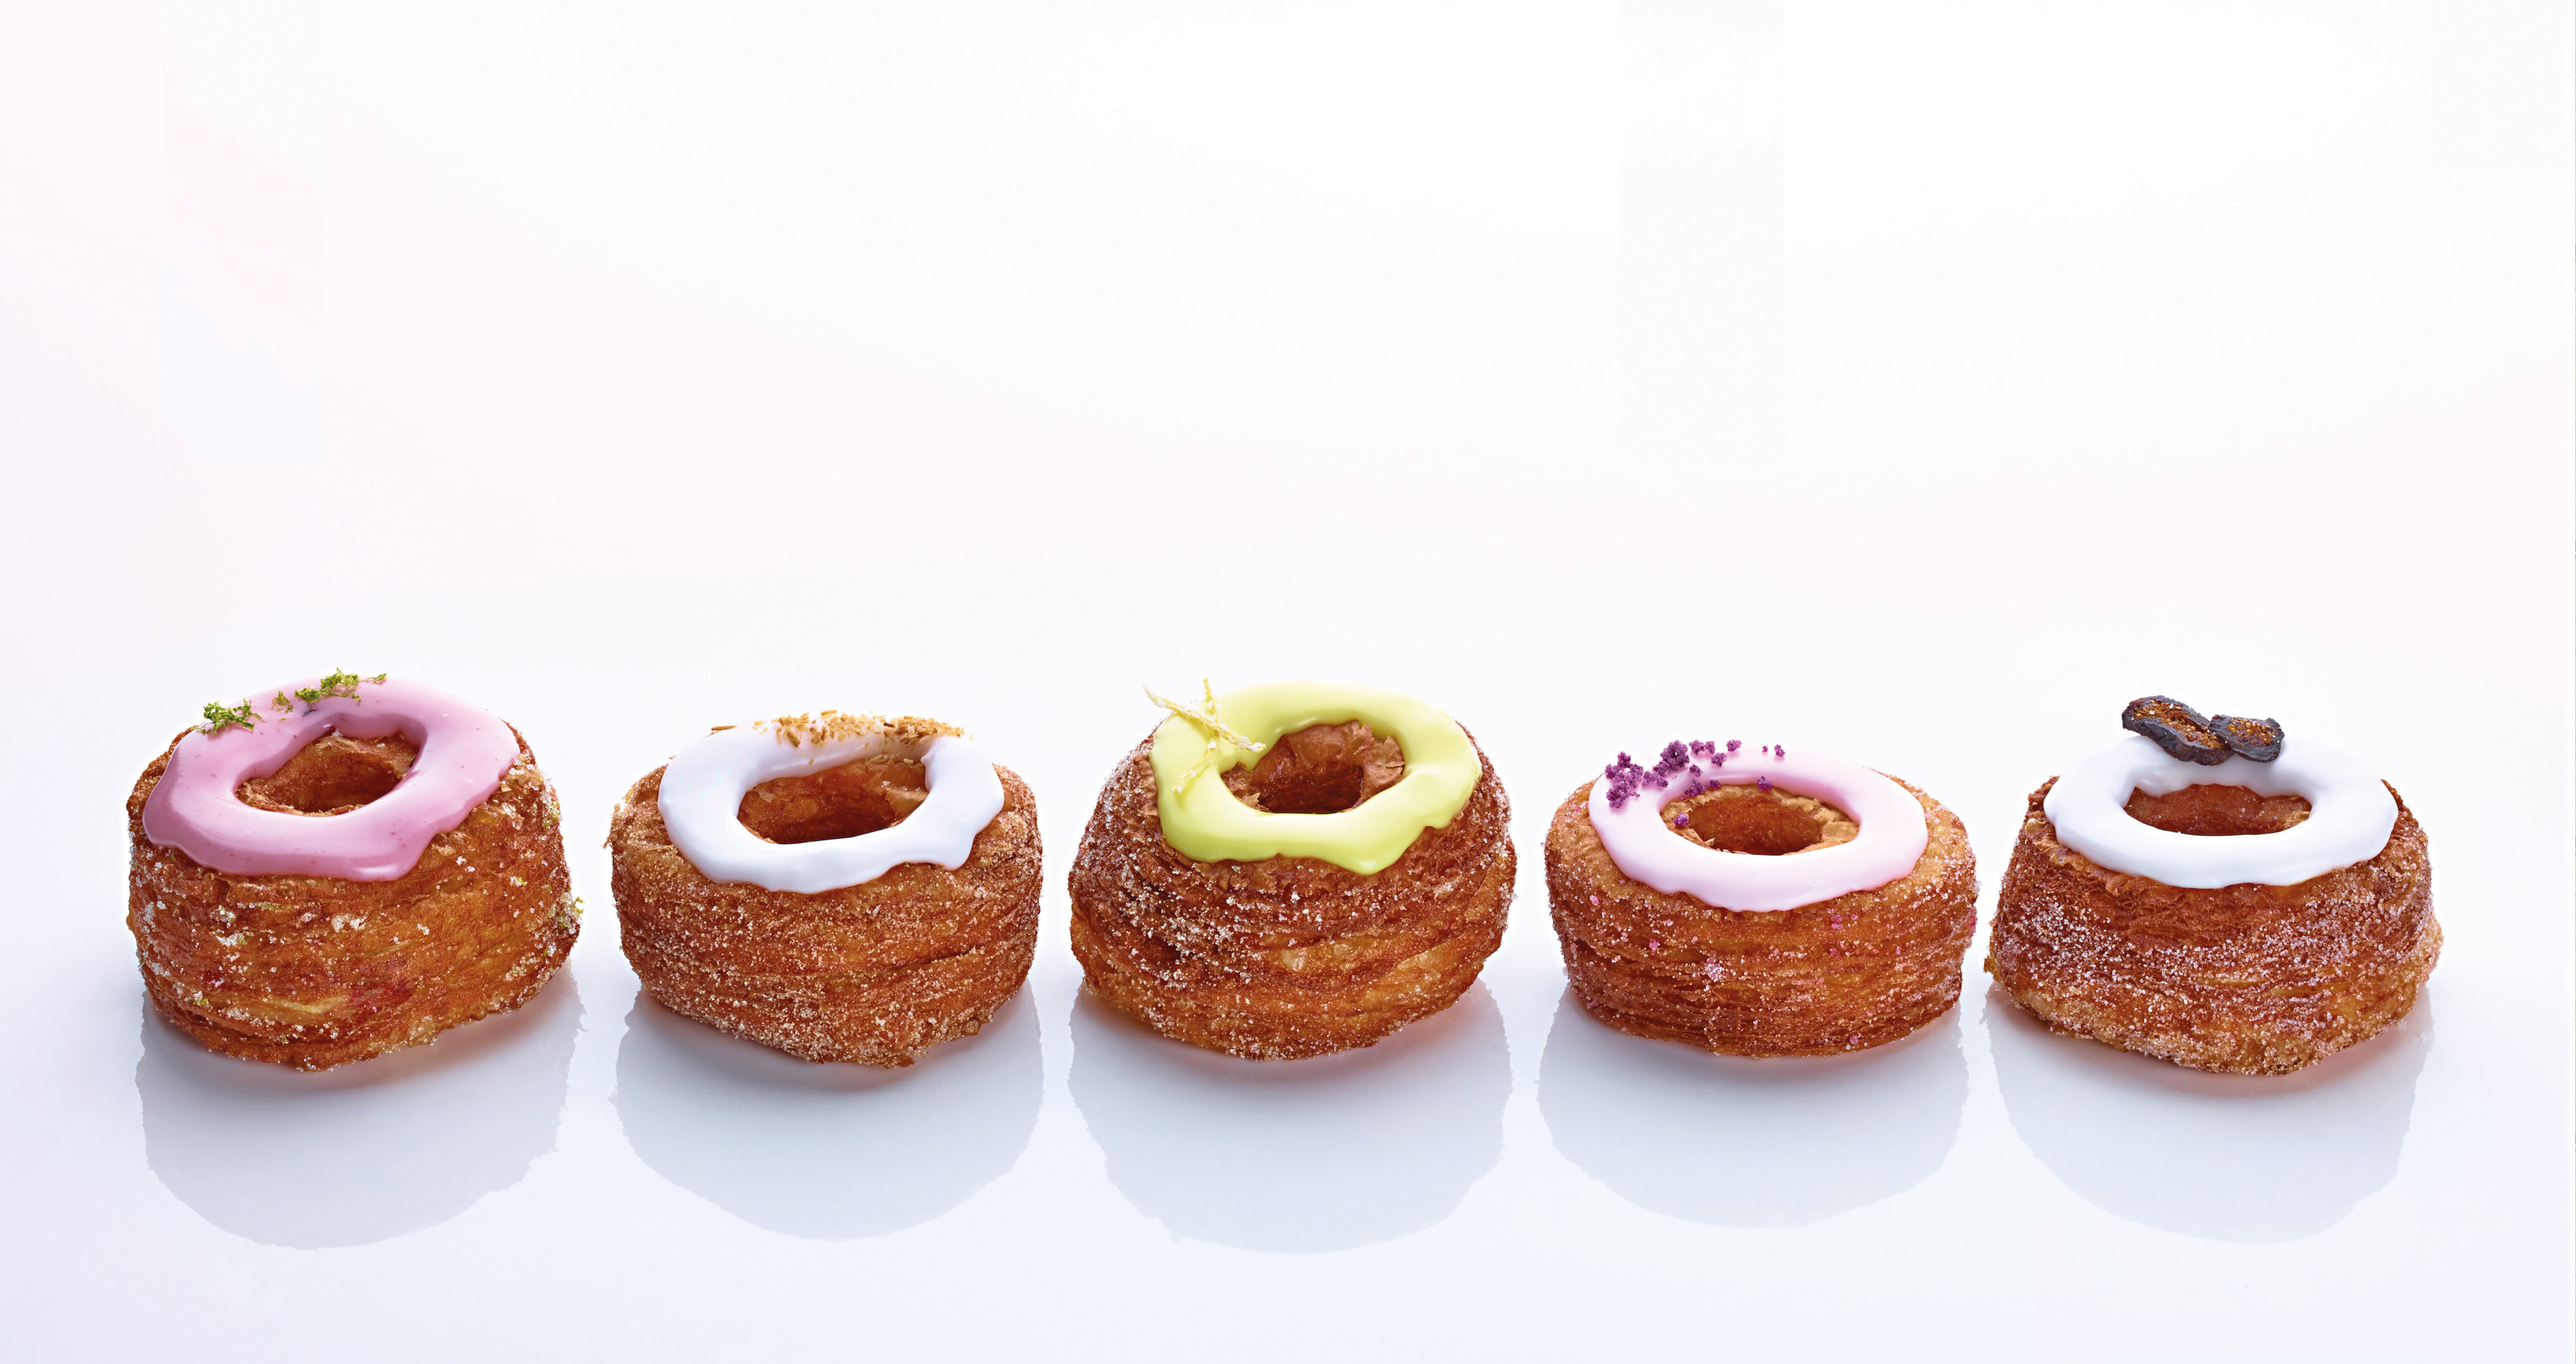 Neil Rankin: Why creating the cronut is hardly finding the Higgs boson